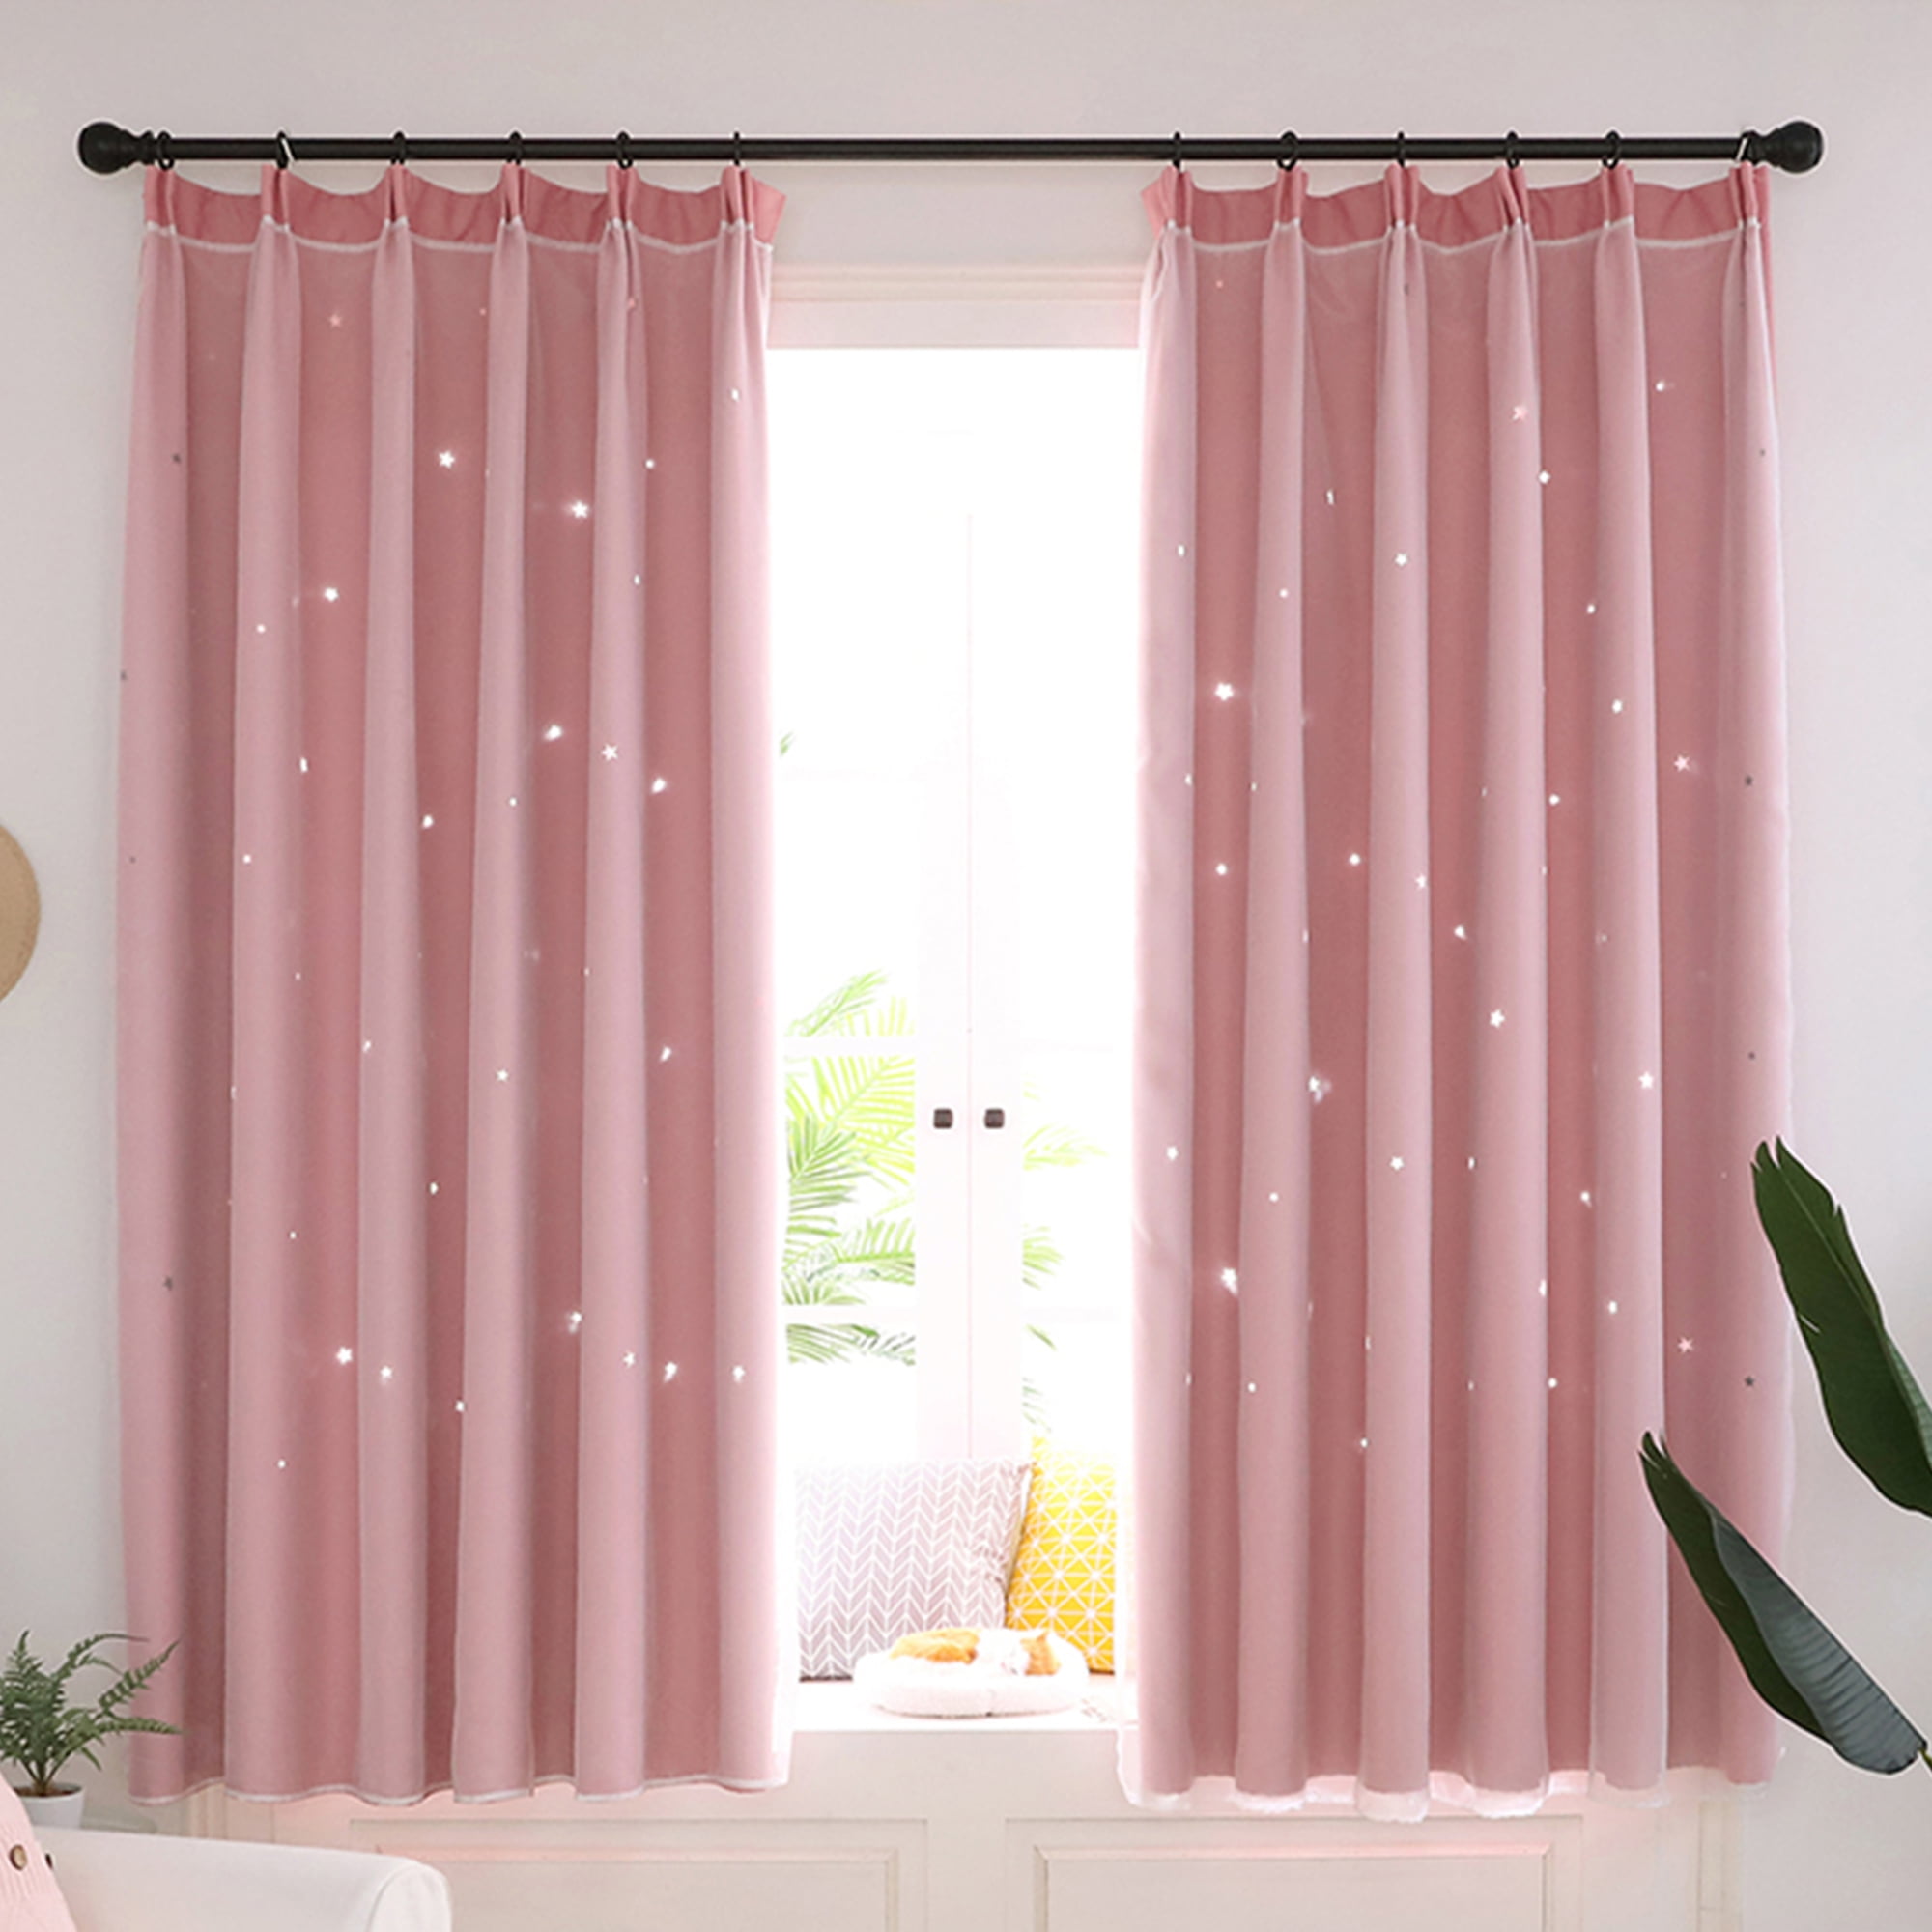 2 FULLY LINED EYELET RING TOP CURTAINS ~ Many Designs 1 PAIR Colours & Sizes! 